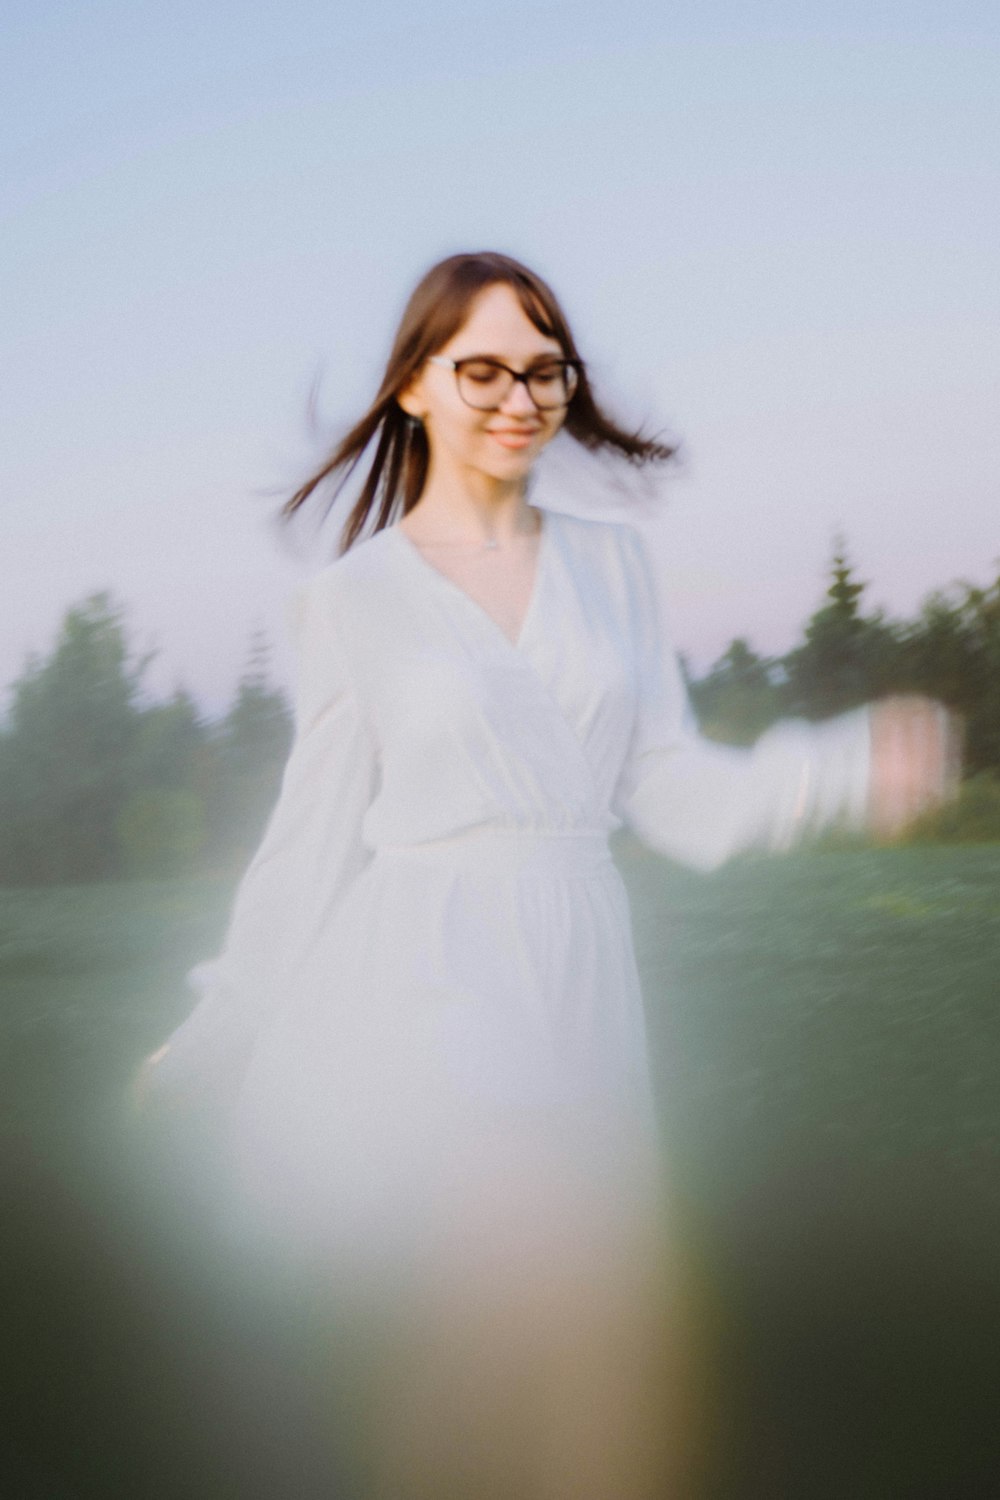 a woman wearing glasses and a white dress